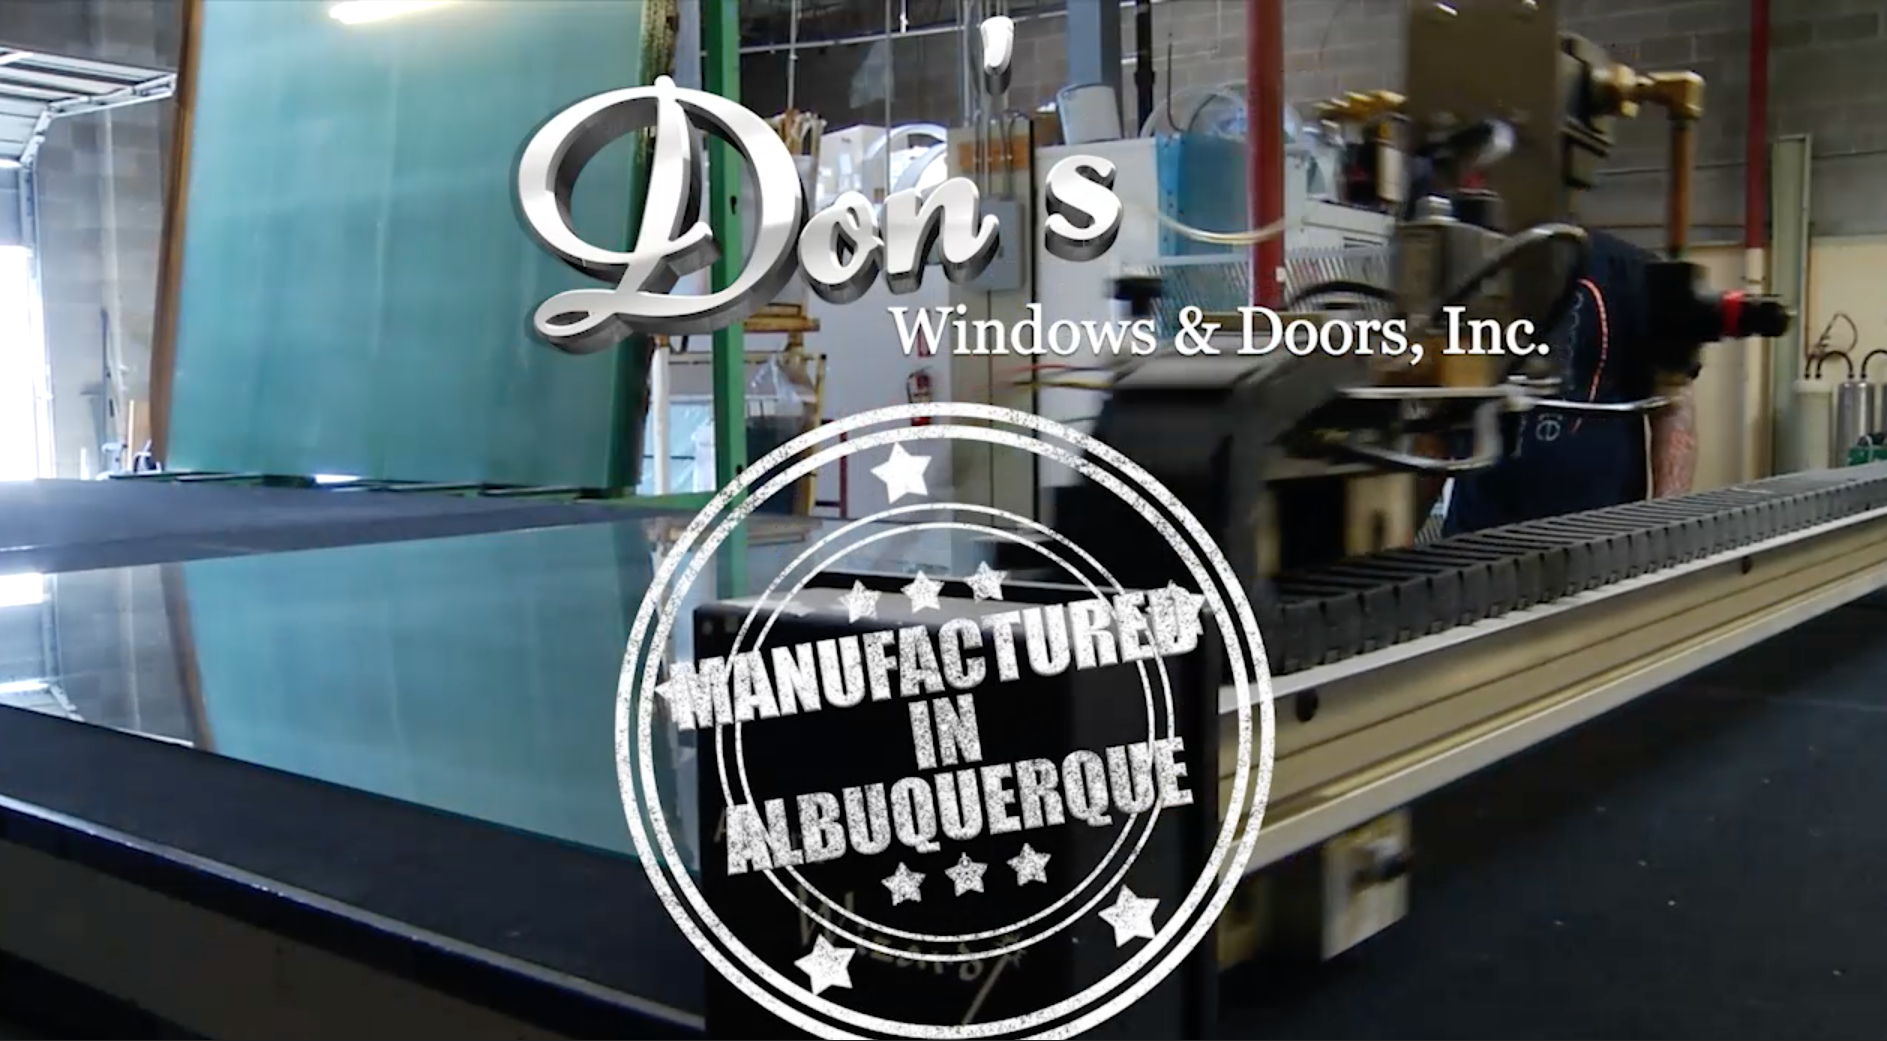 Dons Windows and Doors Logo overlayed on shop image